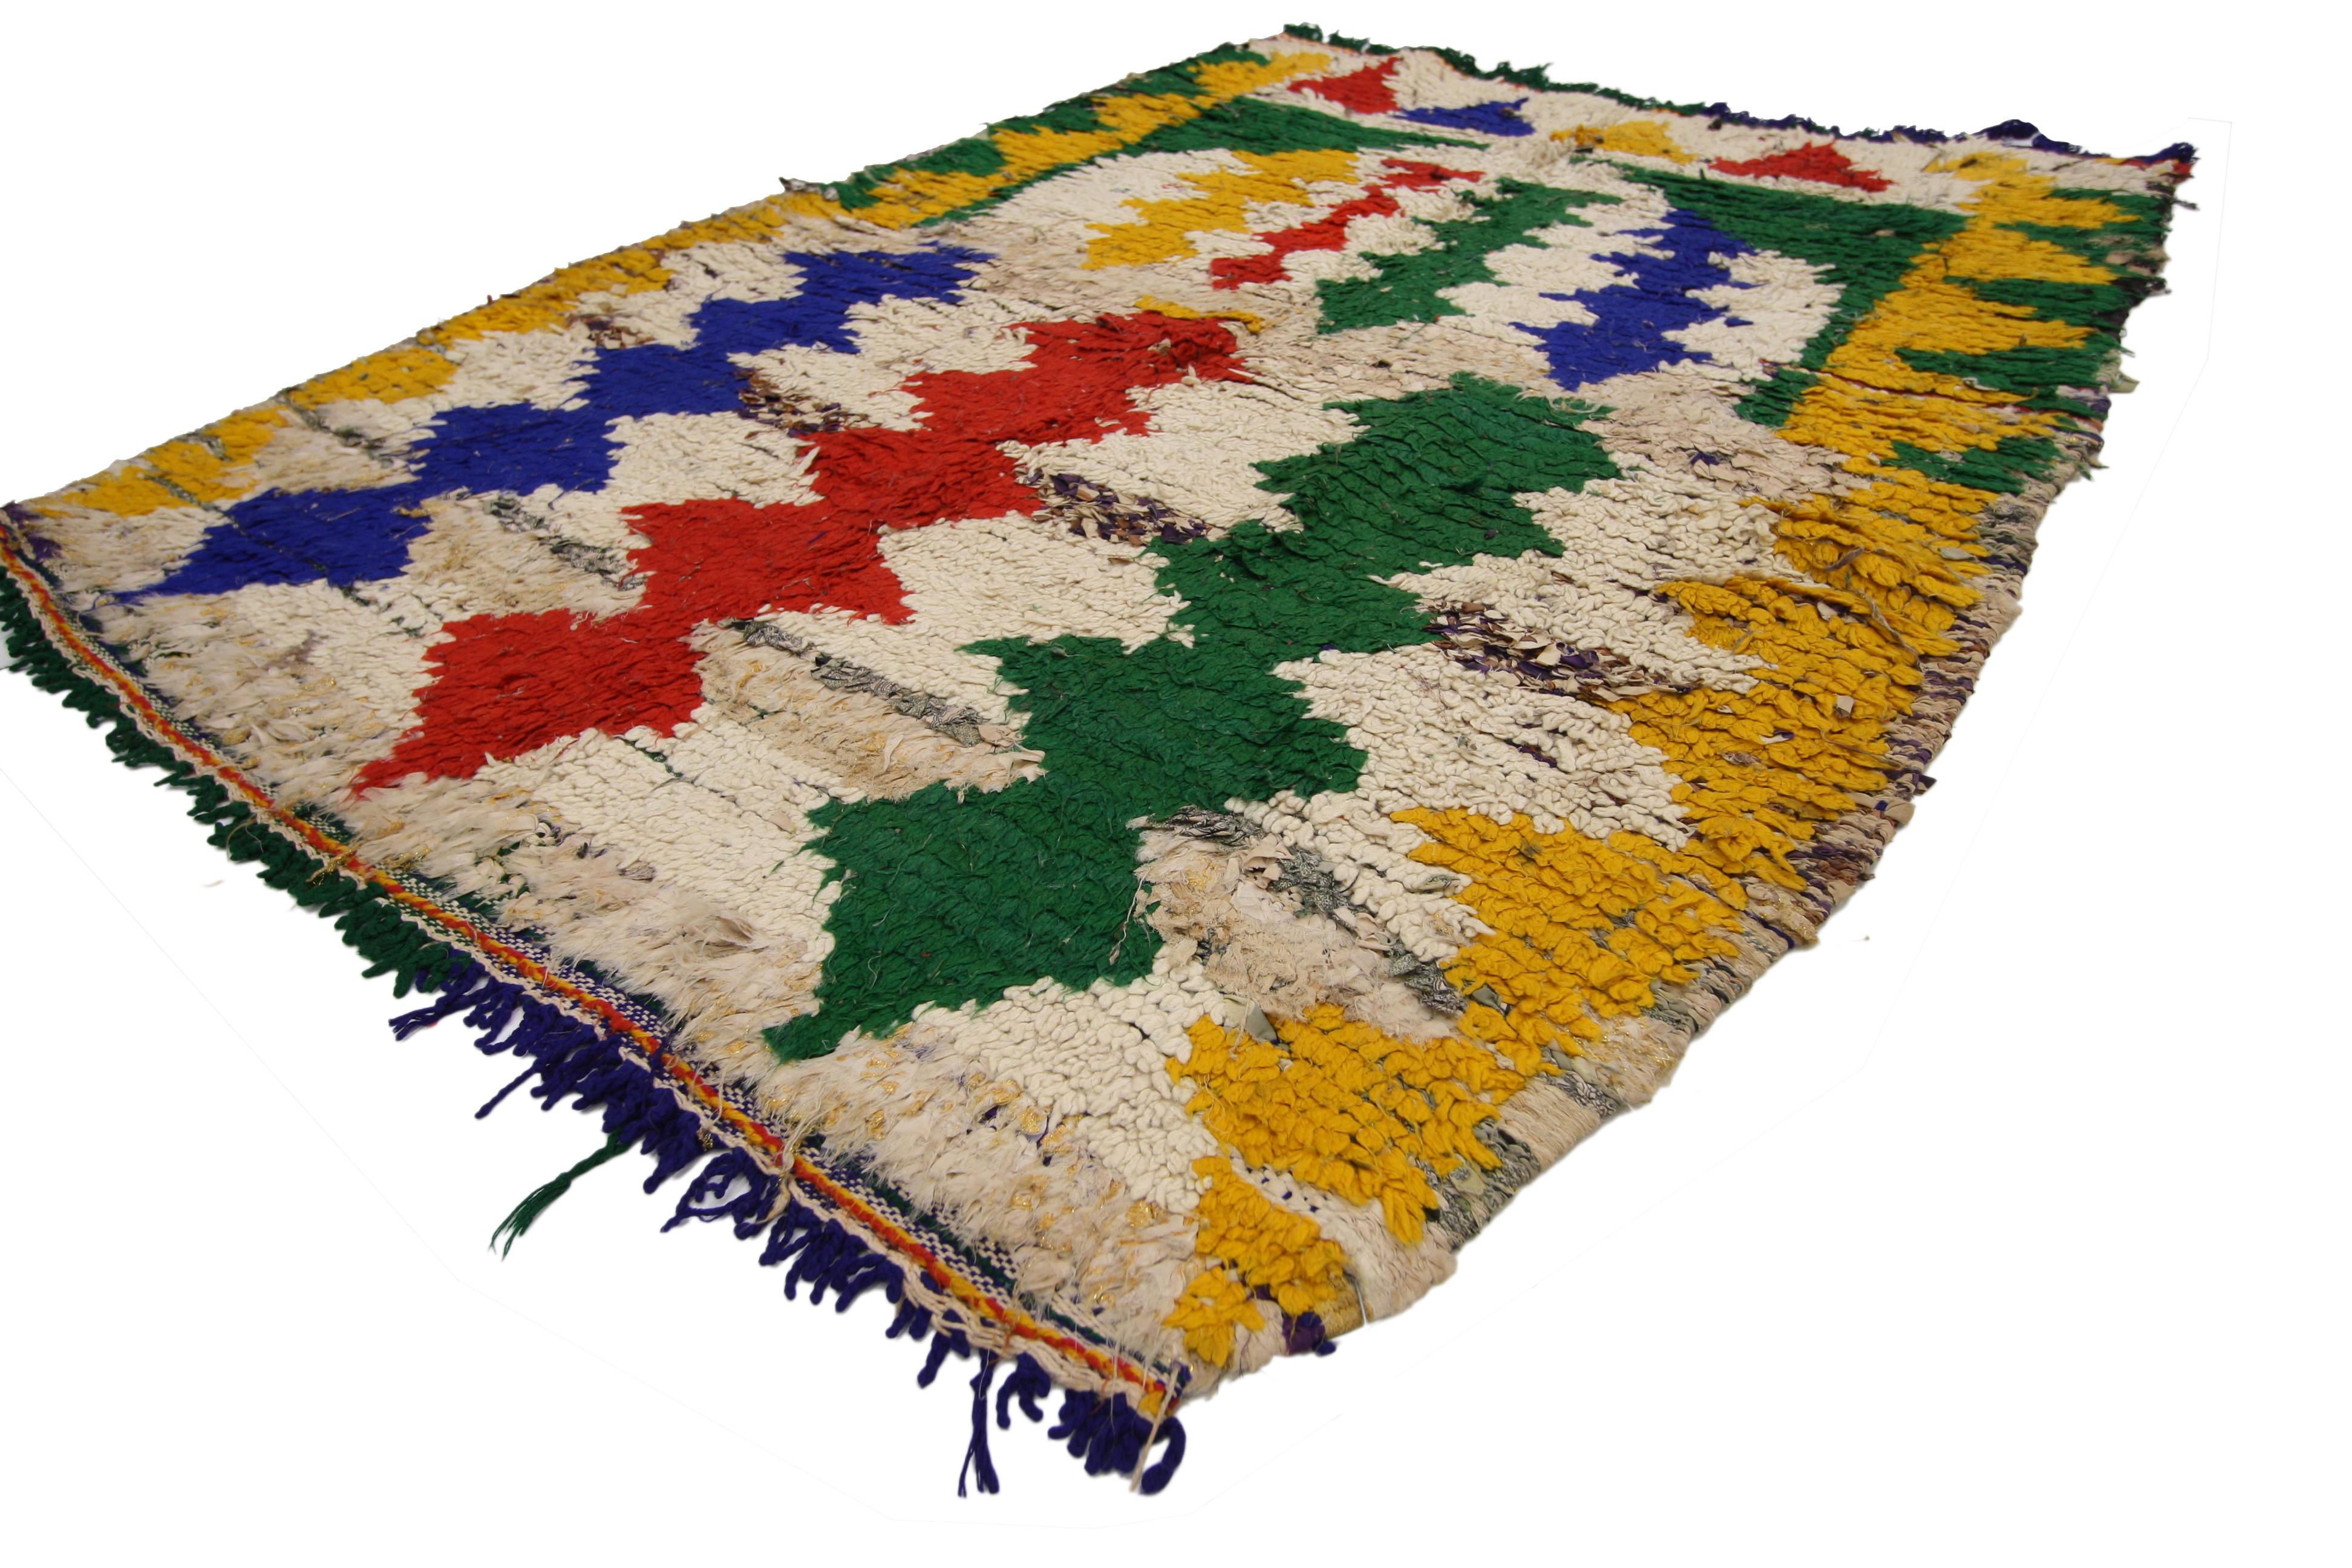 74802 Vintage Berber Moroccan Boucherouite Rug, Colorful Moroccan Shag Accent Rug 03'07 x 04'02. This hand-knotted vintage Berber Moroccan rug displays the true talent of the Berber women weavers. The vintage Boucherouite Moroccan rug features an